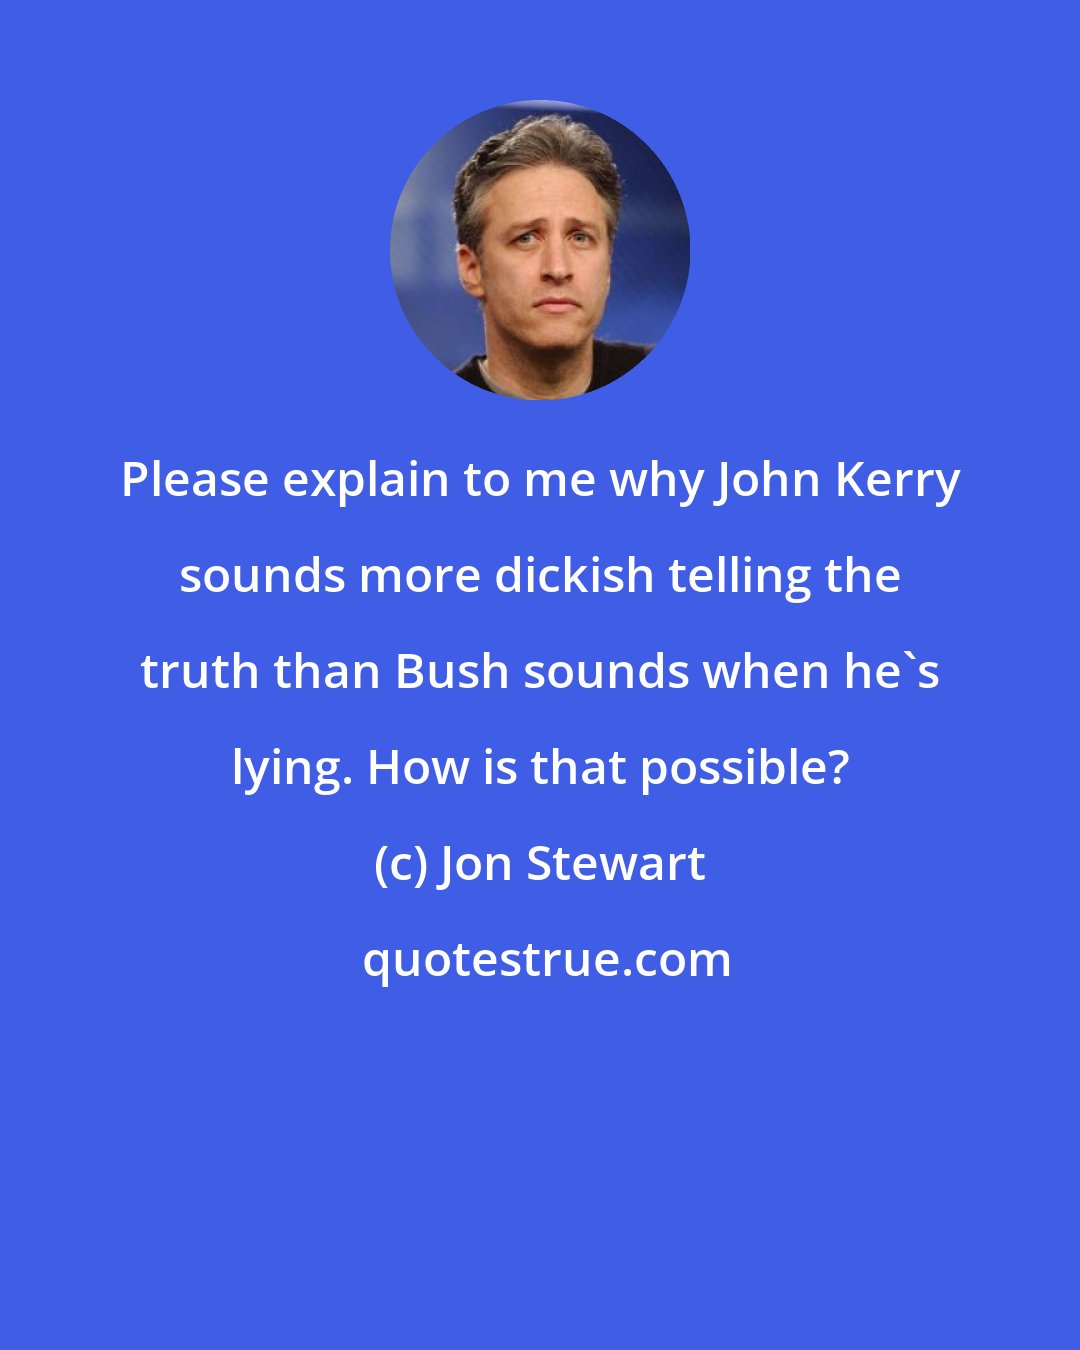 Jon Stewart: Please explain to me why John Kerry sounds more dickish telling the truth than Bush sounds when he's lying. How is that possible?